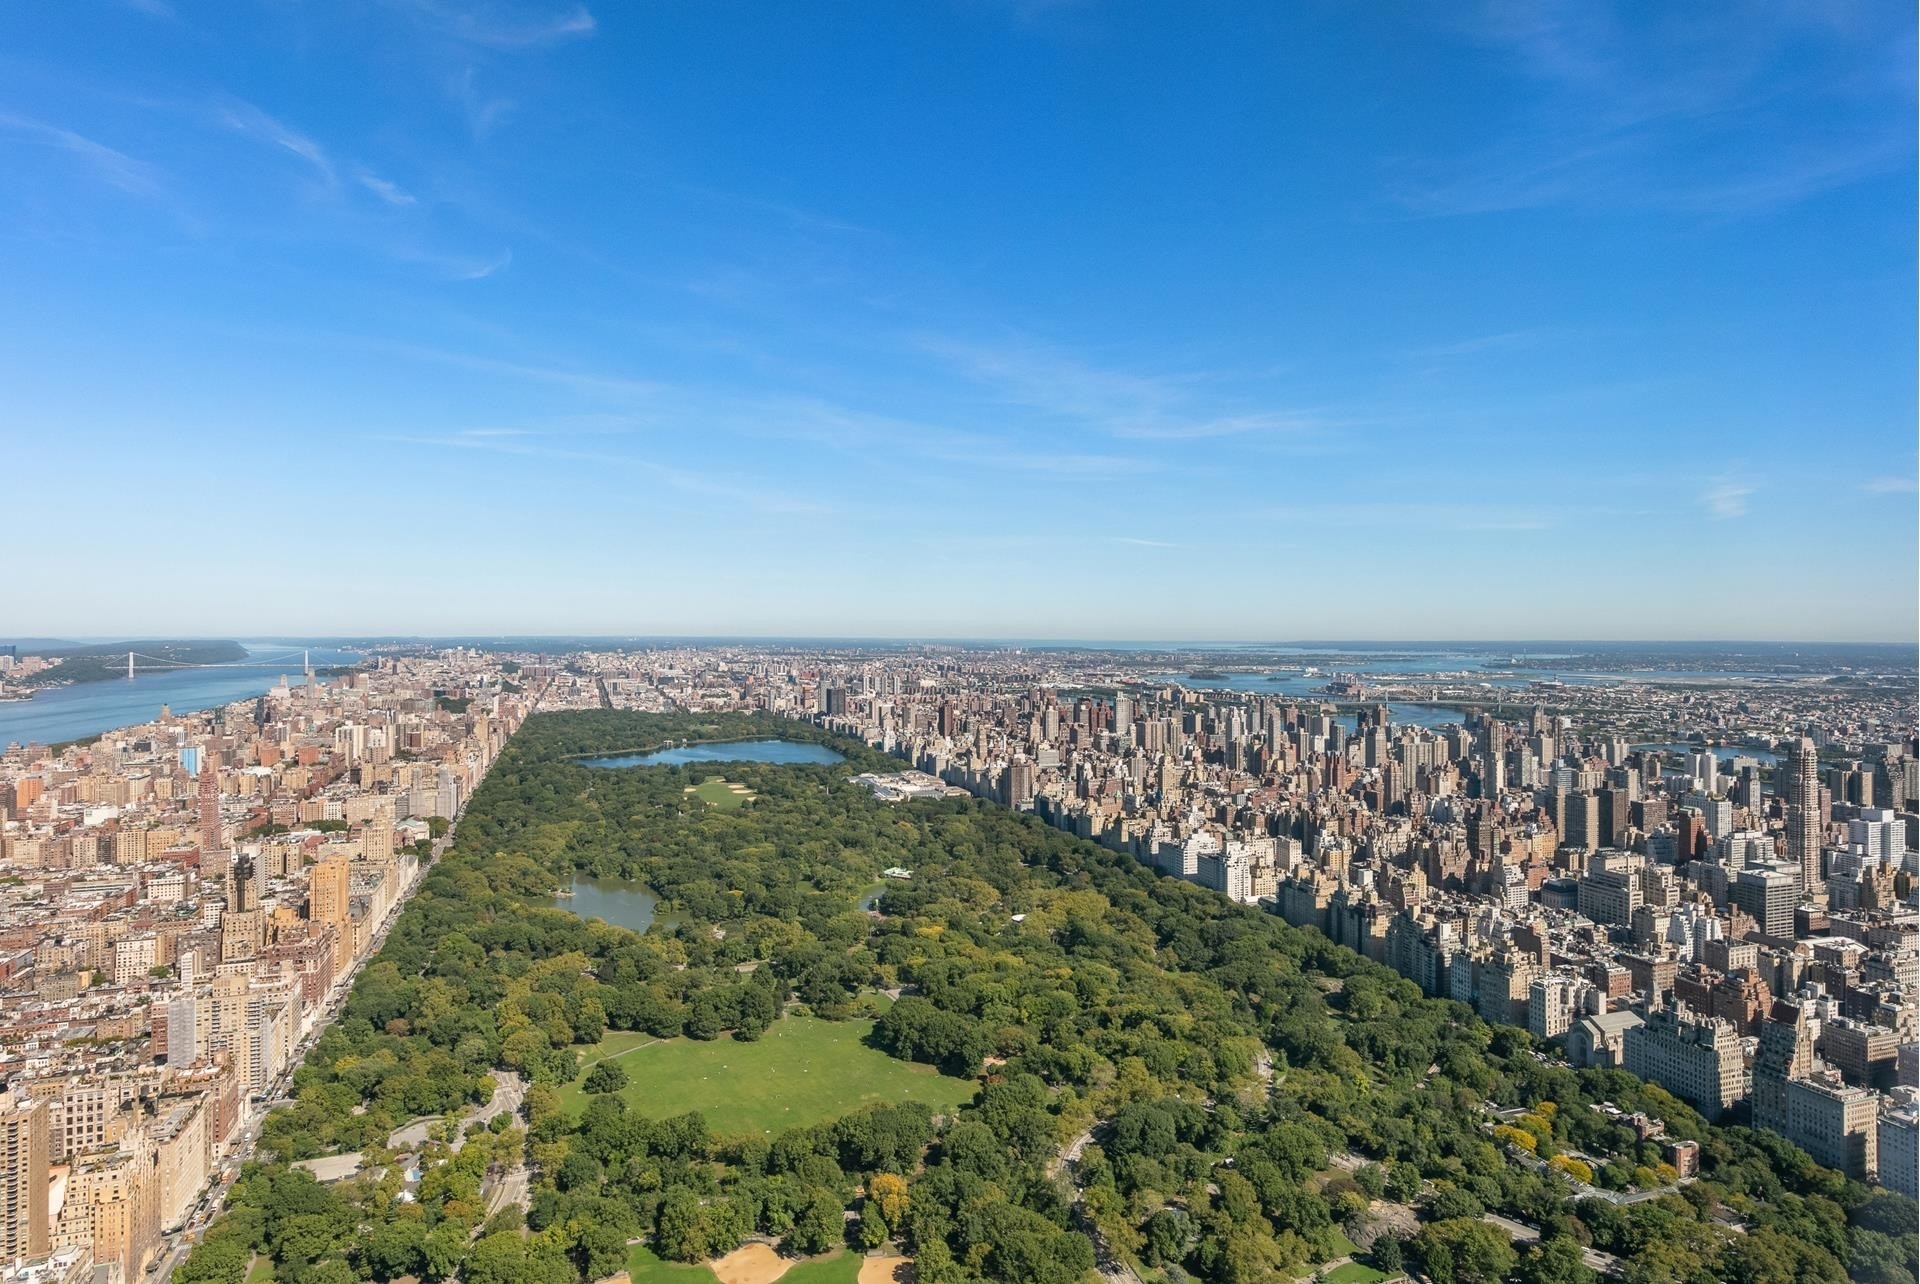 Condominium for Sale at Central Park Tower, 217 W 57TH ST, 97E Midtown West, New York, New York 10019